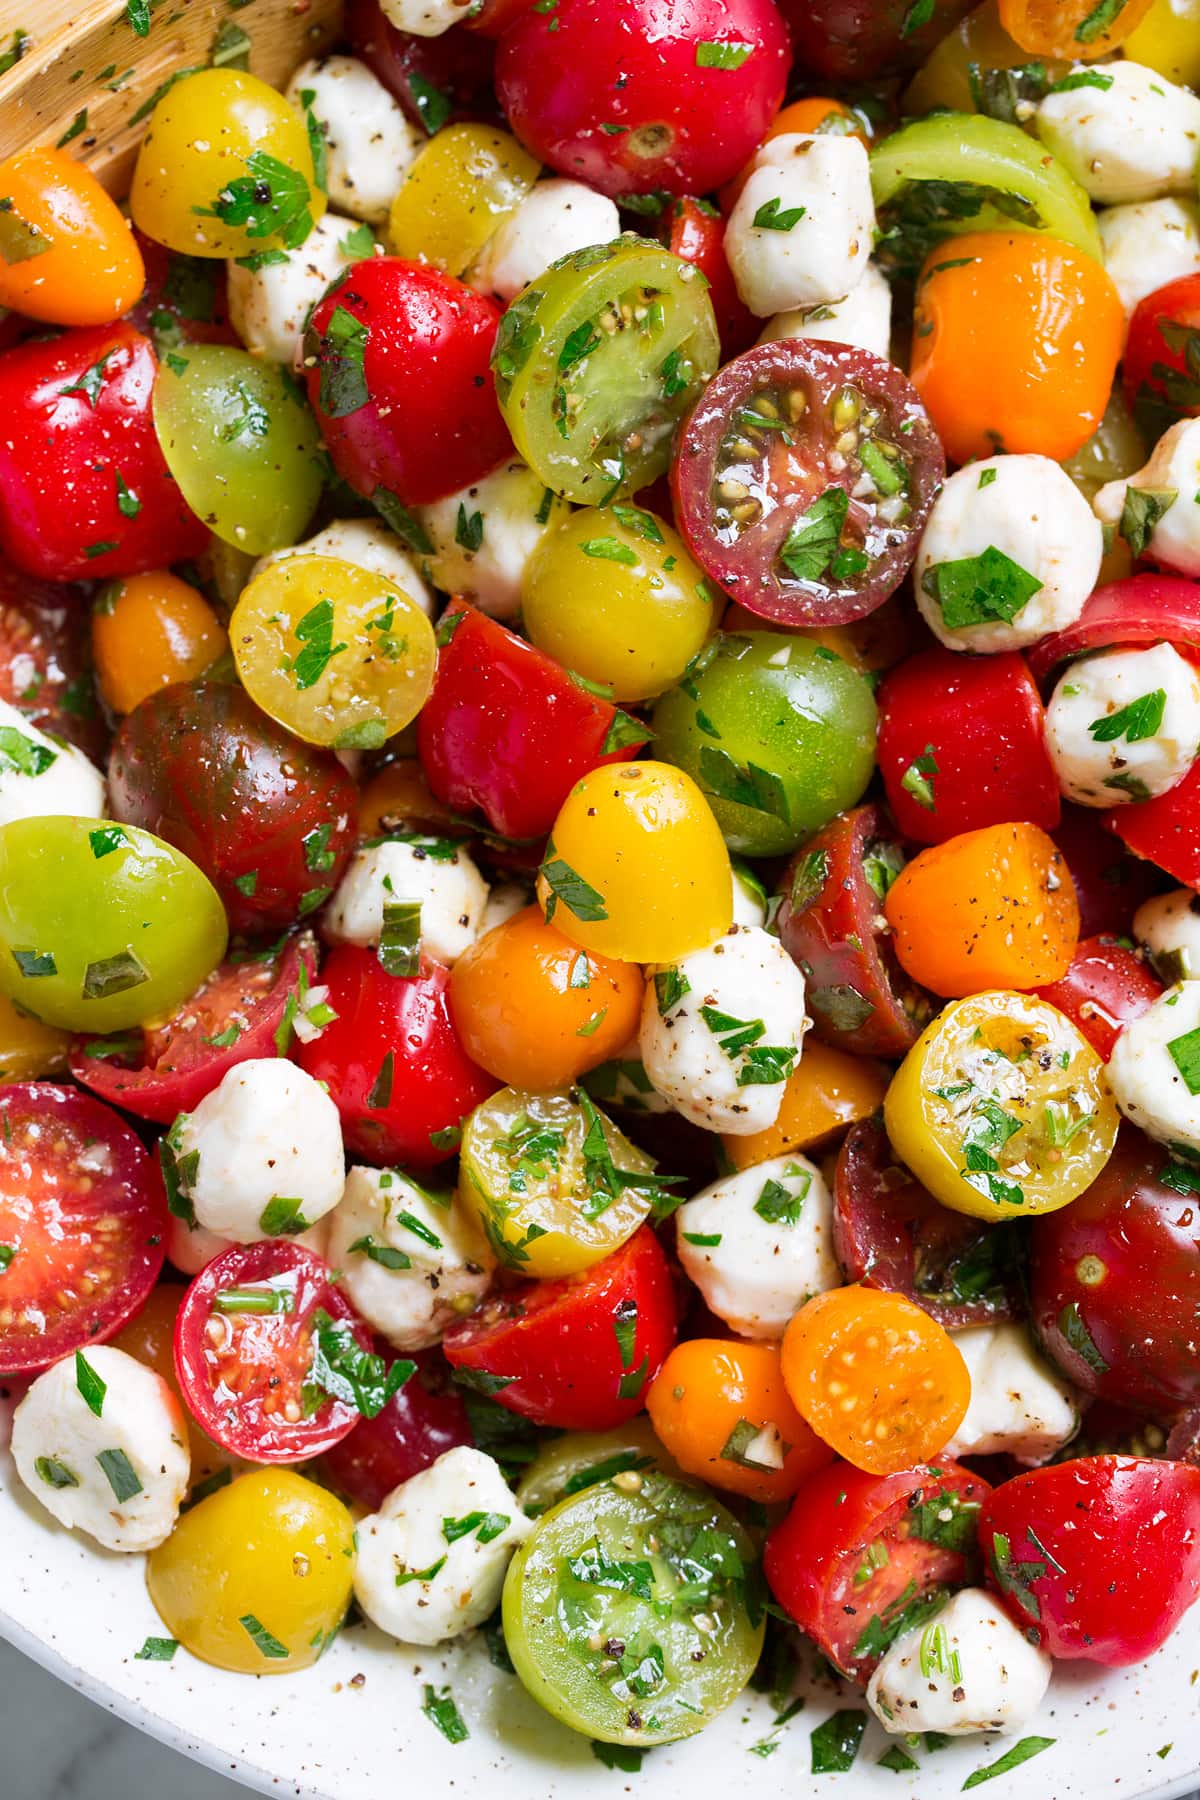 Close up image of tomato salad in a ceramic bowl.